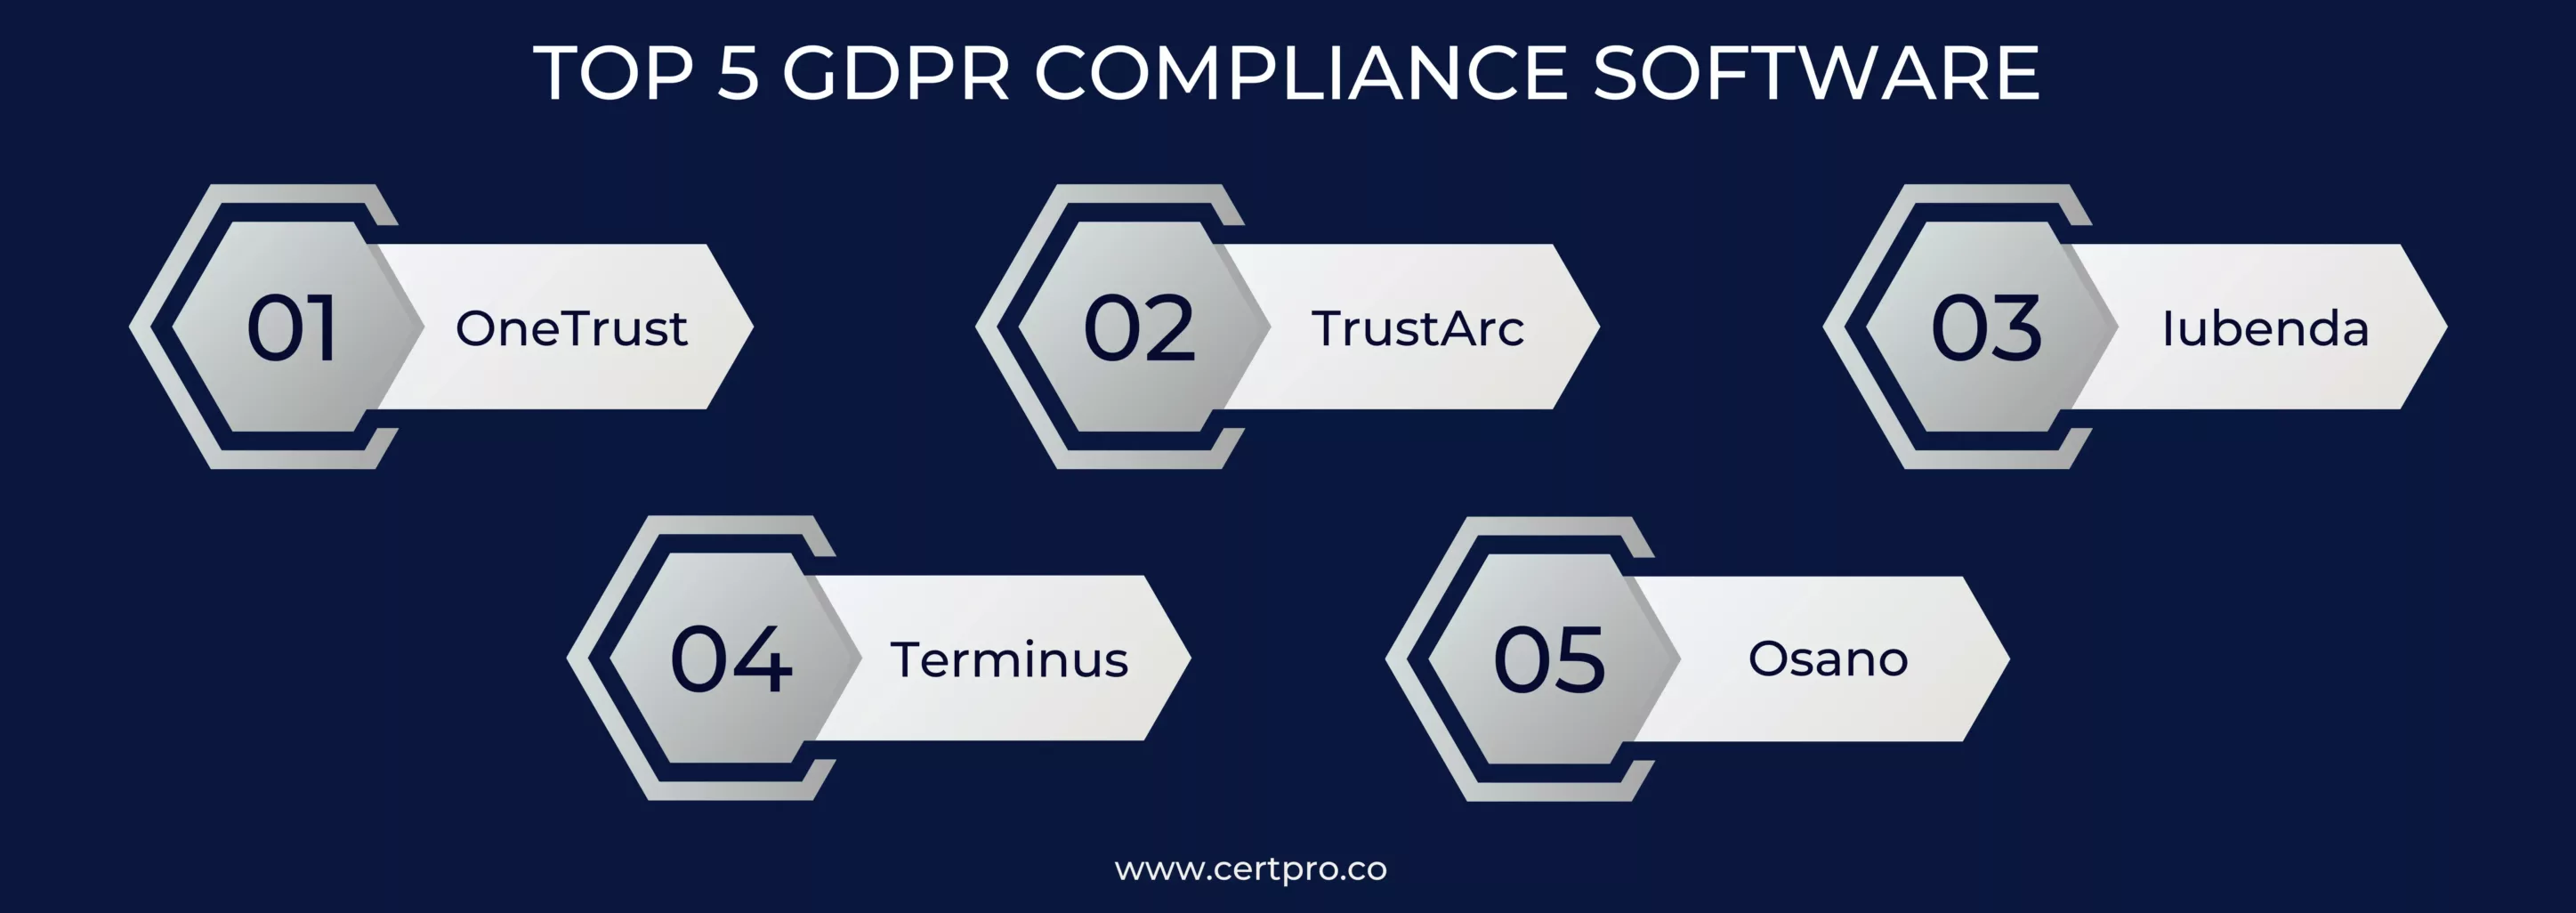 TOP 5 GDPR COMPLIANCE SOFTWARE